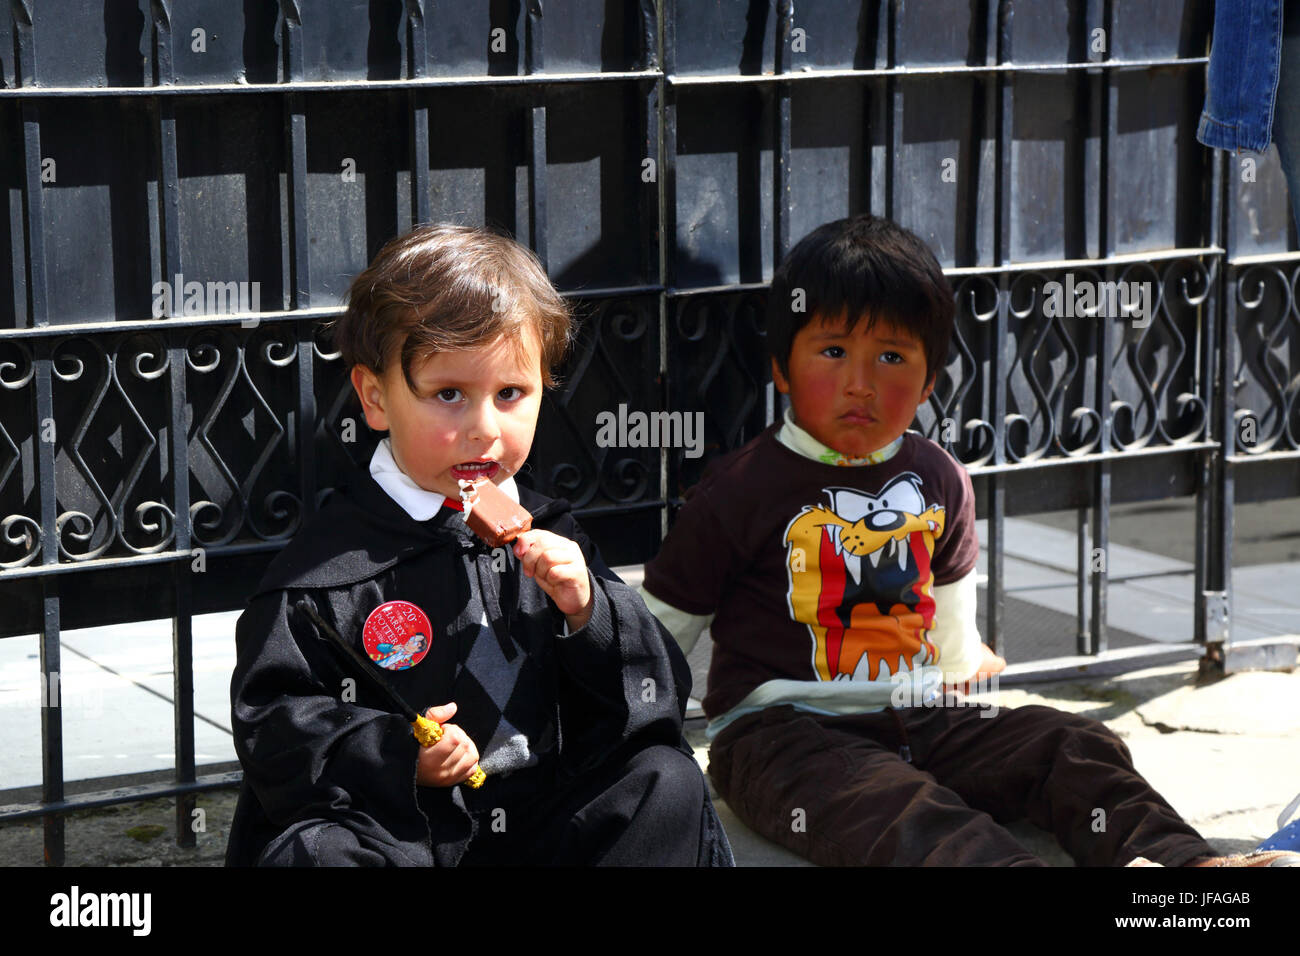 La Paz, Bolivia, 30th June 2017. A young boy dressed as a magician enjoys an ice cream at an event organised by the UK Embassy to celebrate the 20th Anniversary of publication of first Harry Potter book, Harry Potter and the Philosopher's Stone by J.K. Rowling, which was published this week in 1997. Credit: James Brunker/Alamy Live News Stock Photo